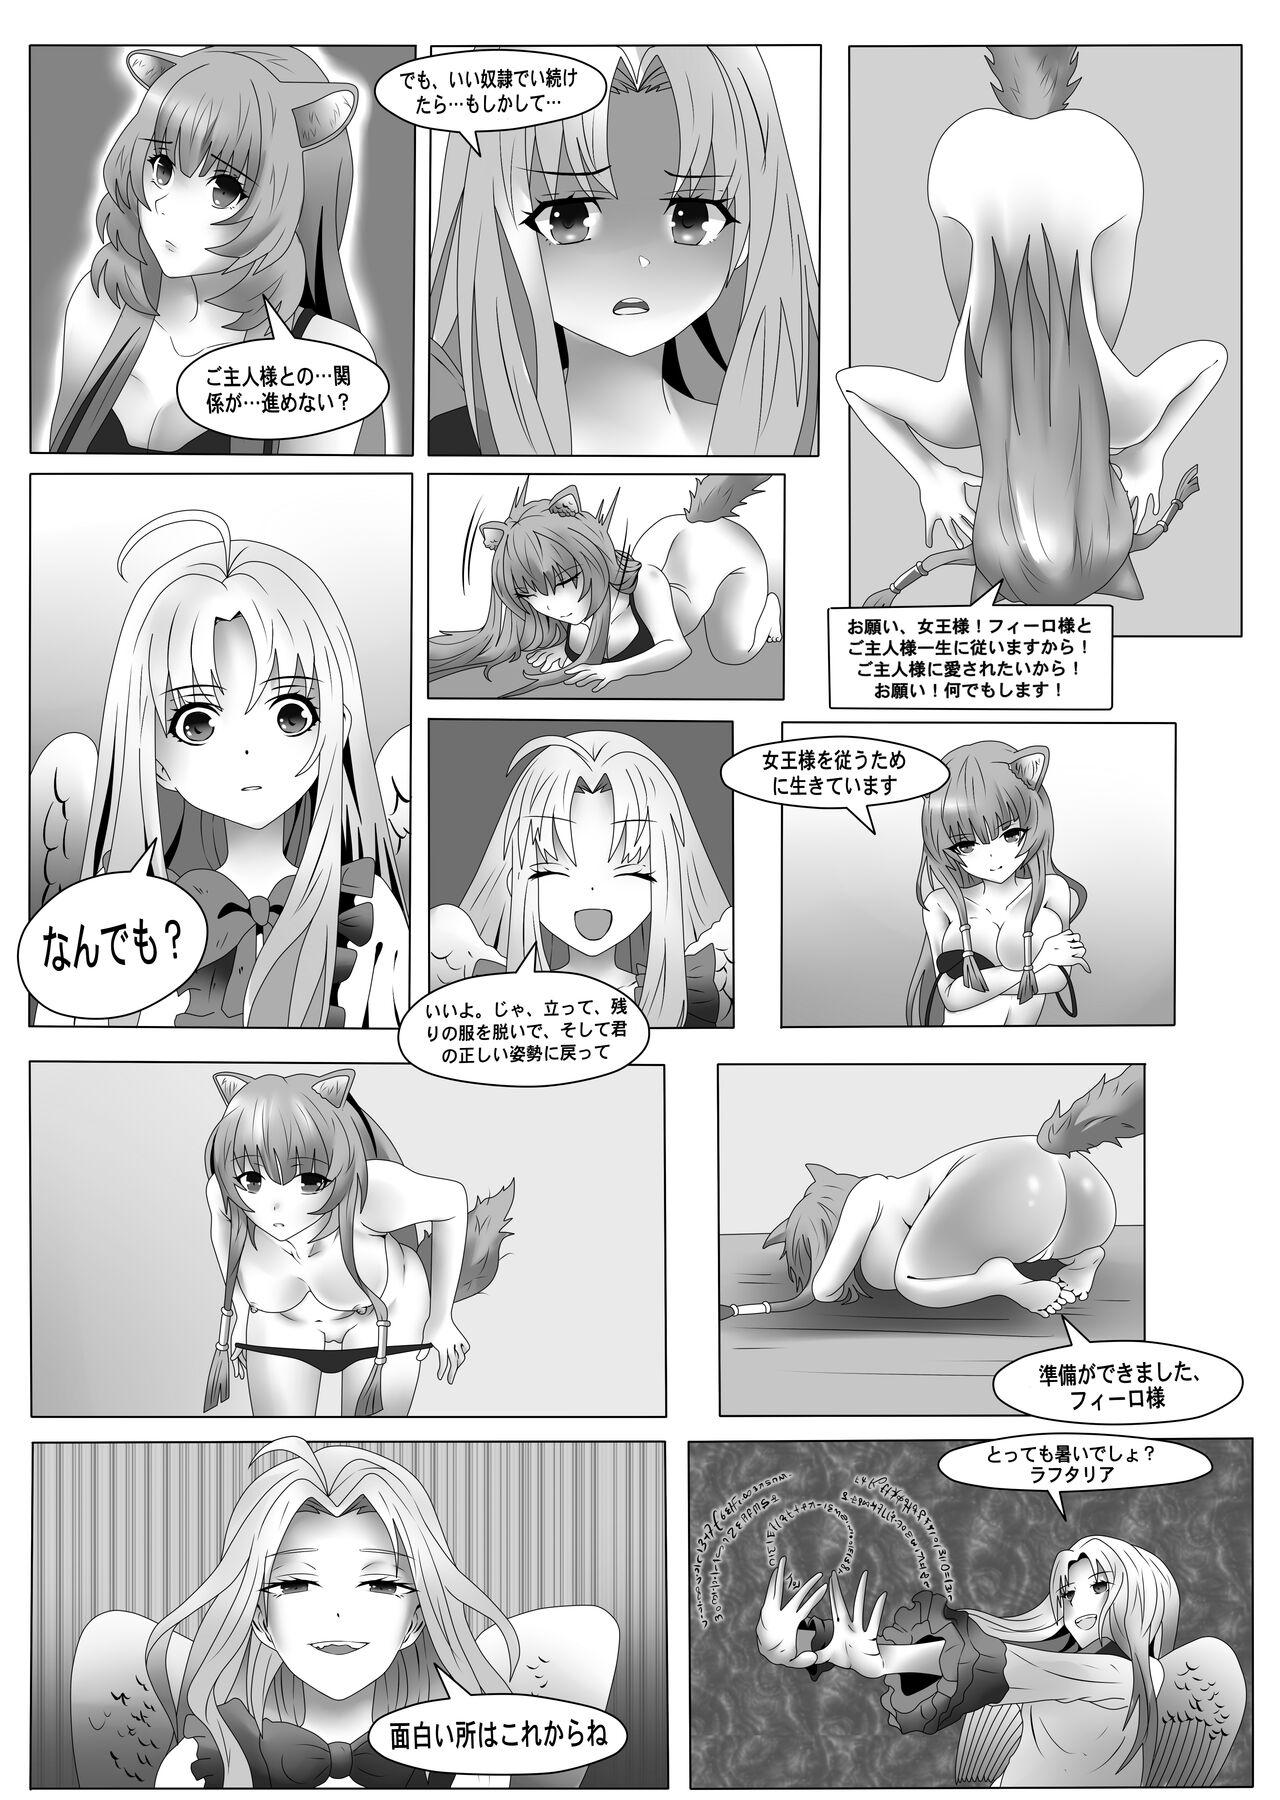 Young Tits The Rising Of The Shield Hero - Happy Point with My Sister and Teacher - Tate no yuusha no nariagari | the rising of the shield hero Fake Tits - Page 6